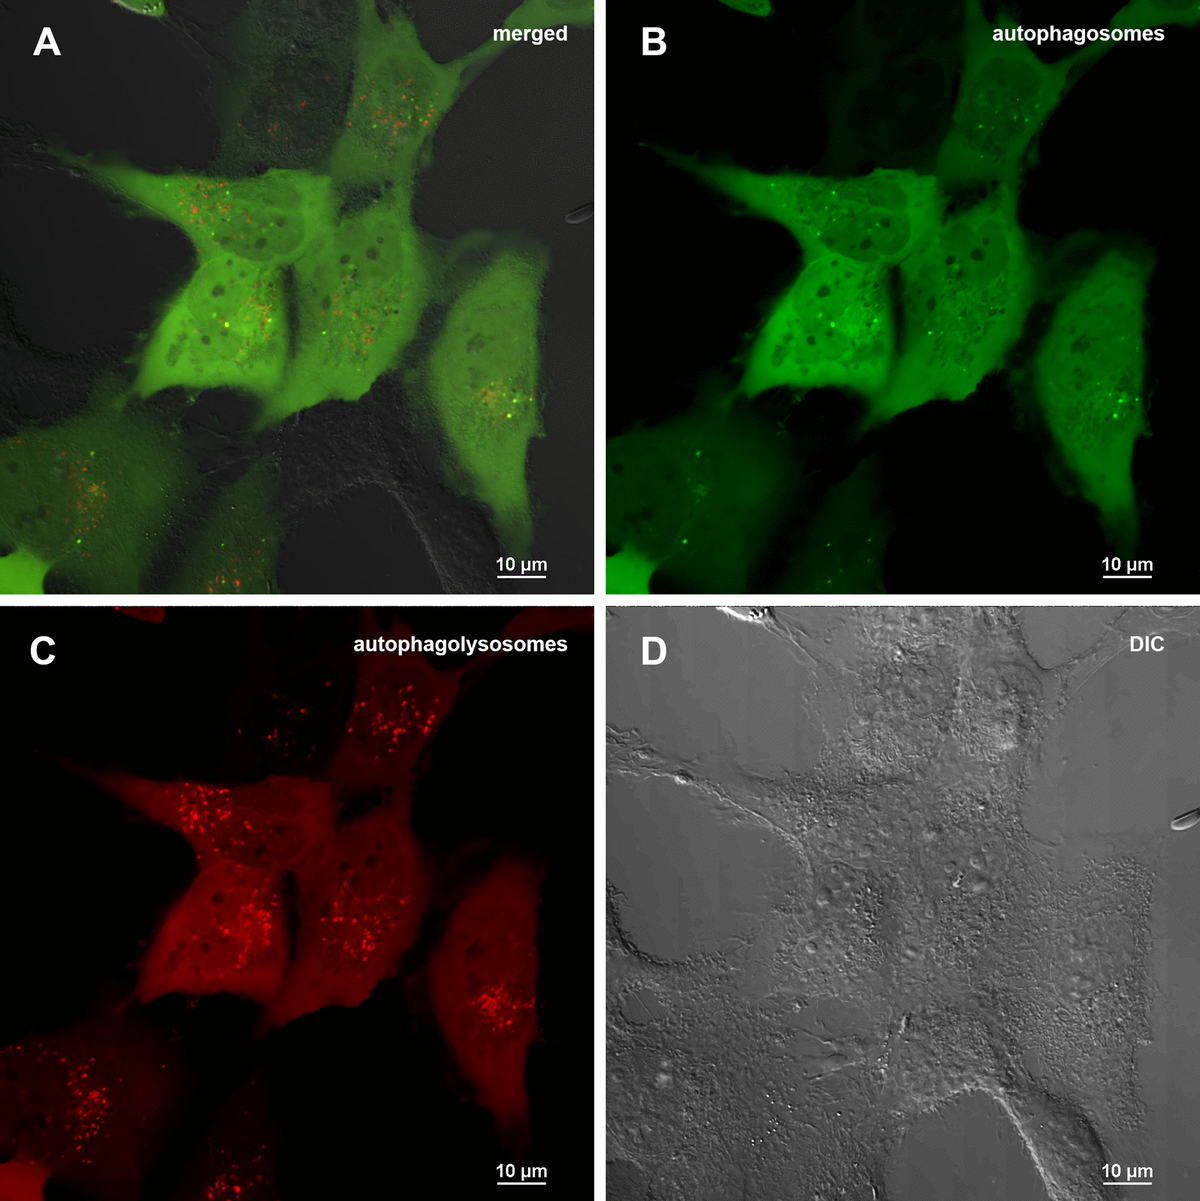 Assessment of autophagy in MRC5-SV40 cells carrying GFP-LC3-mCherry reporter (control sample) when treated with DMSO 0.5% after 24 hours. (A) merge of red, green fluorescence channels and bright field, (B) green fluorescence channel, (C) red fluorescence channel, (D) bright field.